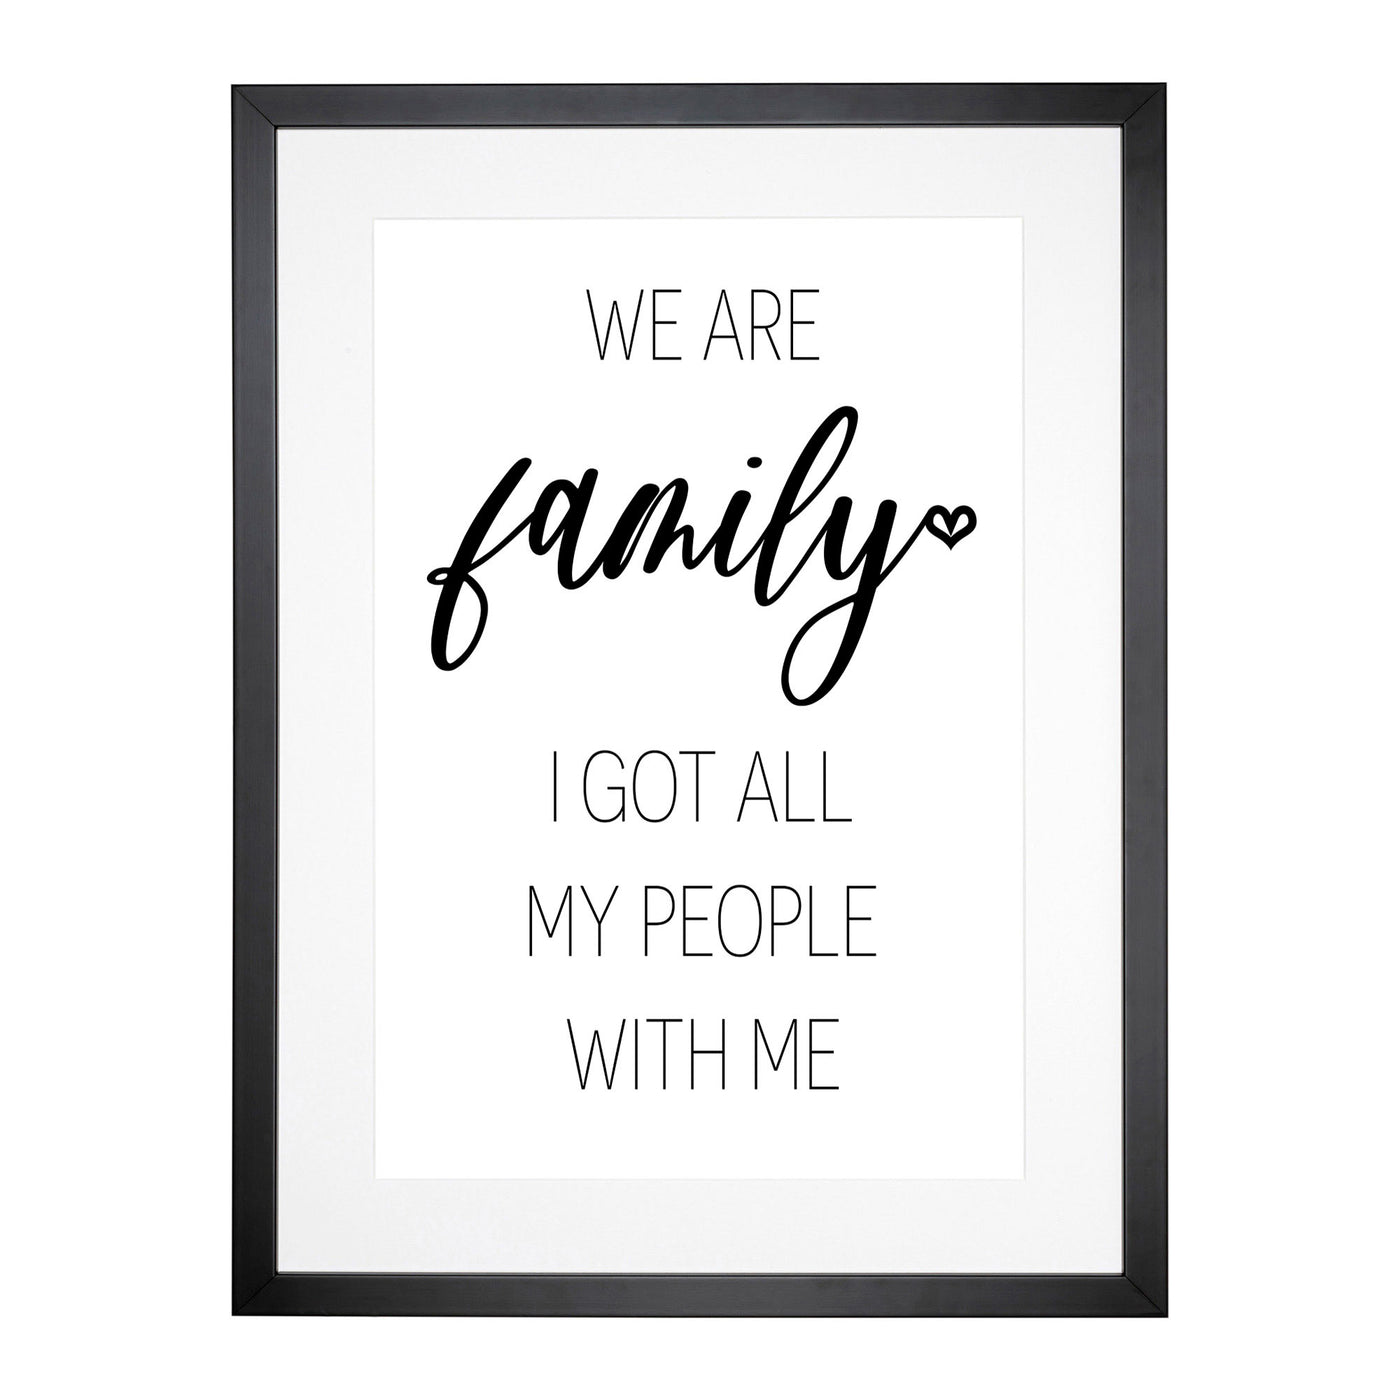 We Are Family Typography Framed Print Main Image